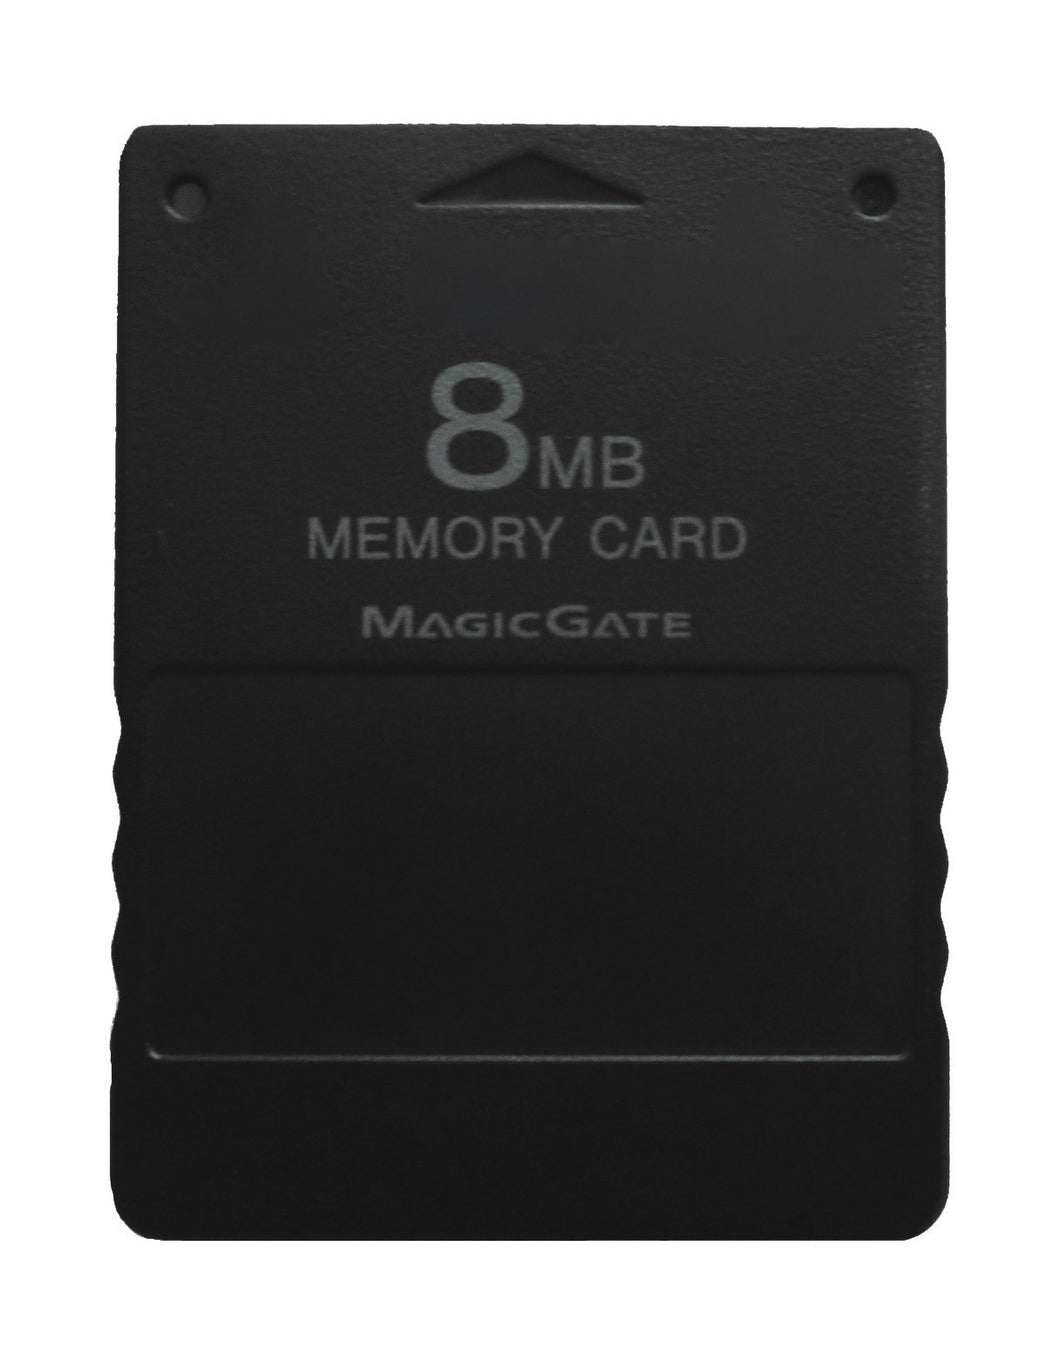 8MB Memory Card for Sony Playstation-2 ps2 - halfrate.in